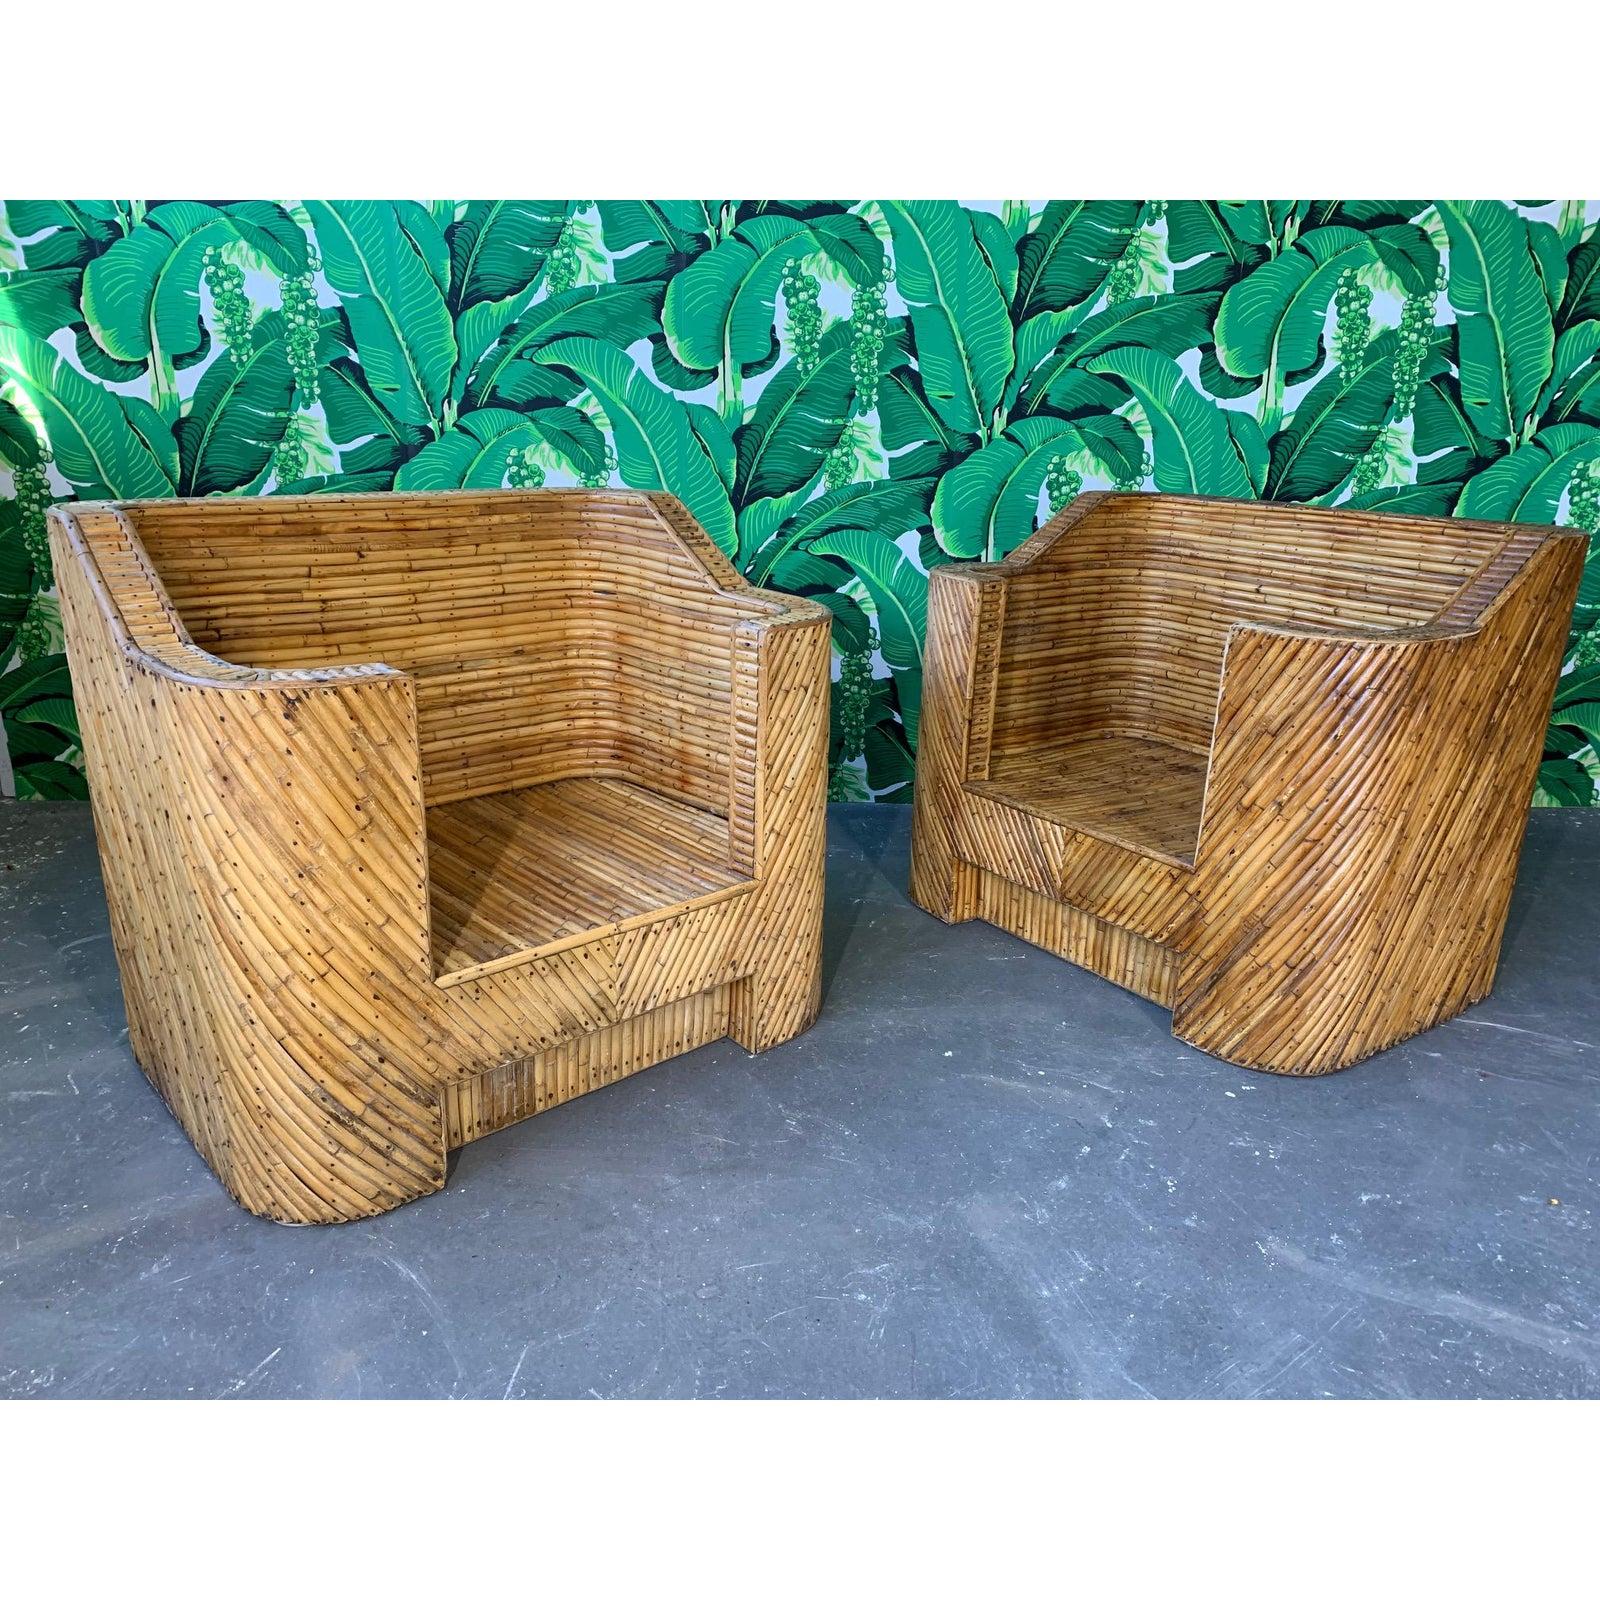 Vintage split reed bamboo club chairs circa 1960s purchased by original owner in Guam. Very heavy, excellent construction, minor signs of age appropriate wear to finish.